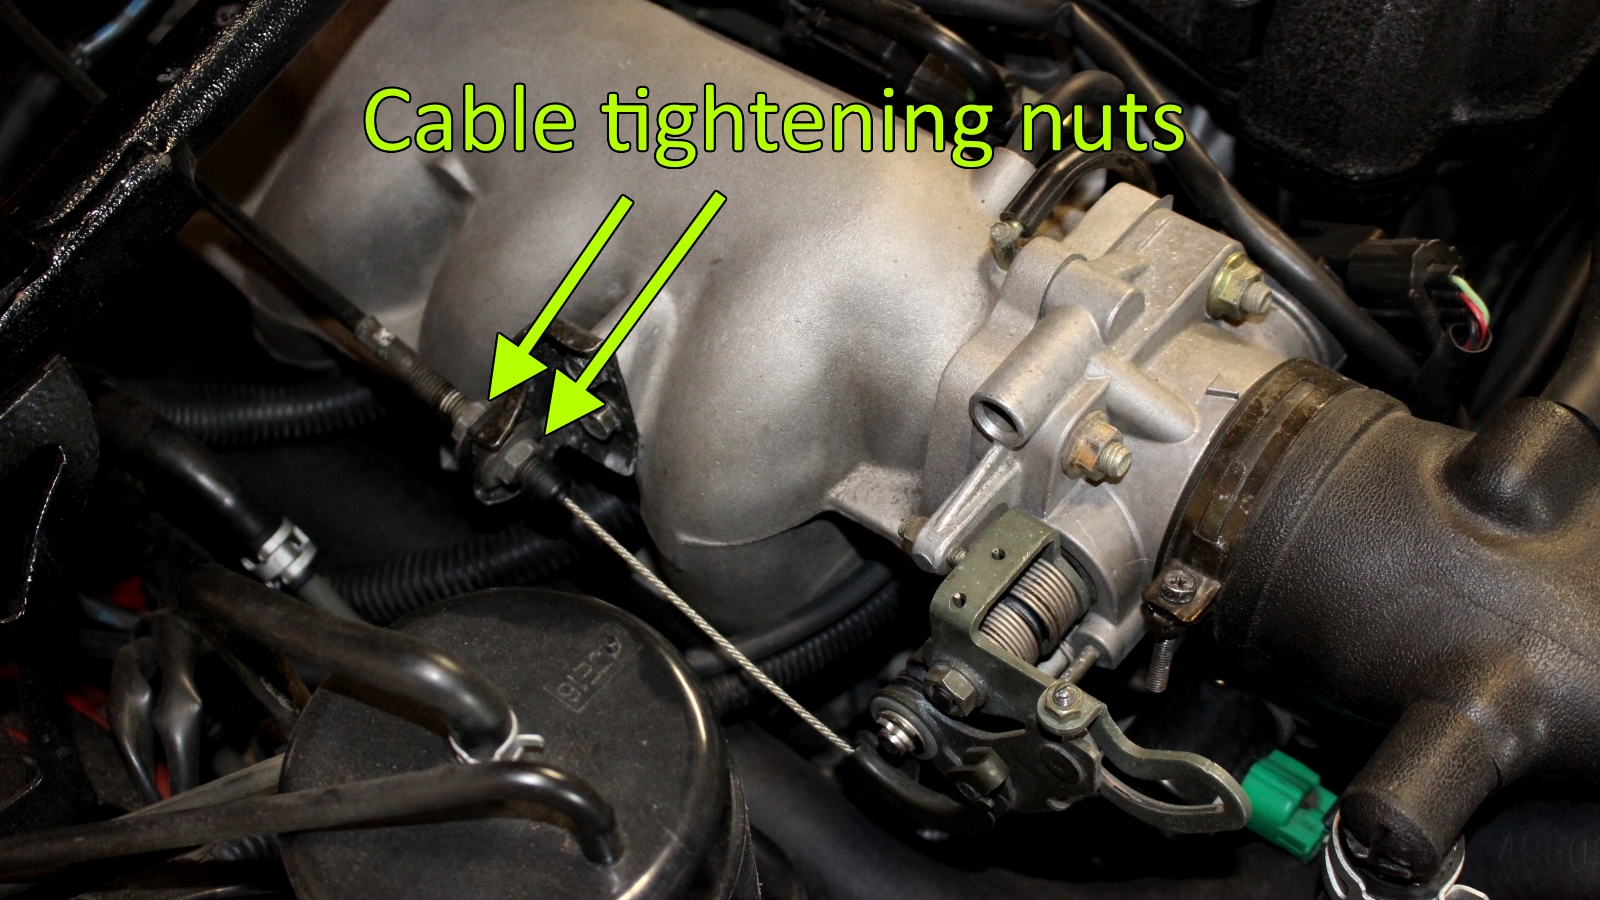 Miata accelerator cable mounted to intake manifold bracket and connected to throttle body with tightening nuts labeled